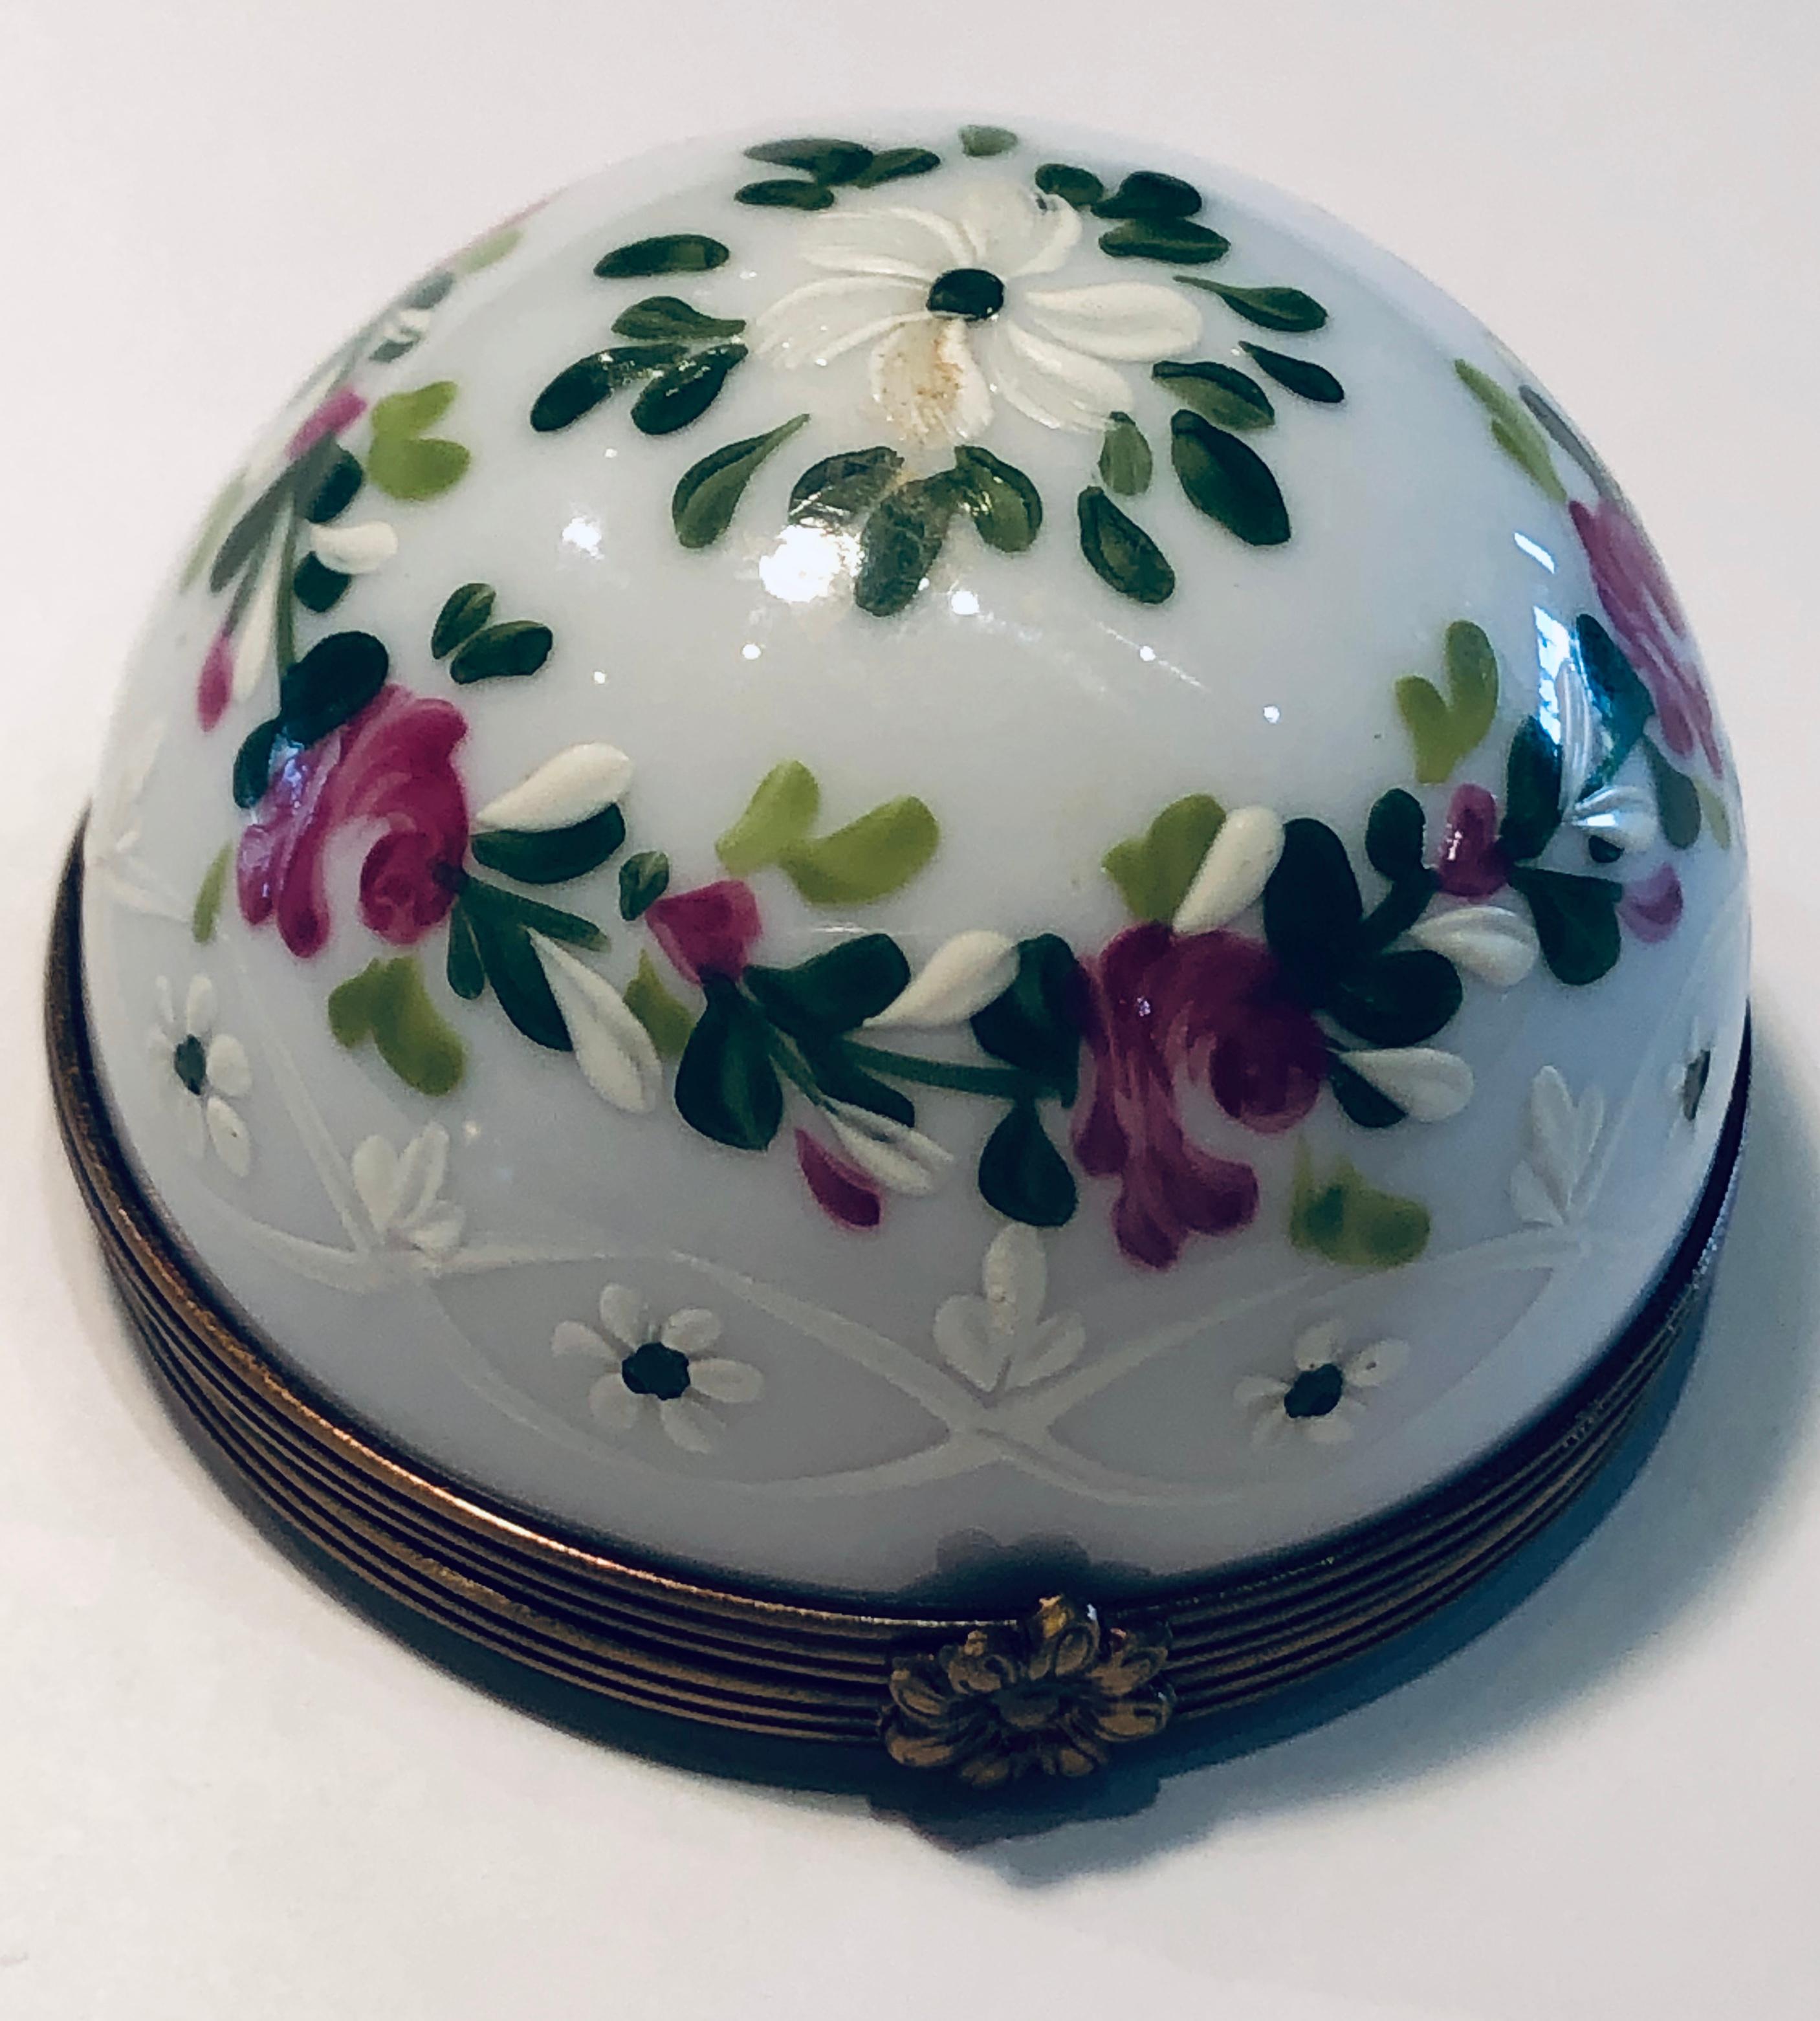 Very unusual, Limoges porcelain miniature dome is handmade and hand painted with a rose motif in pink, green and white. Dome opens to reveal a beautiful bouquet of three dimensional handmade roses on a background painted with roses. Box features